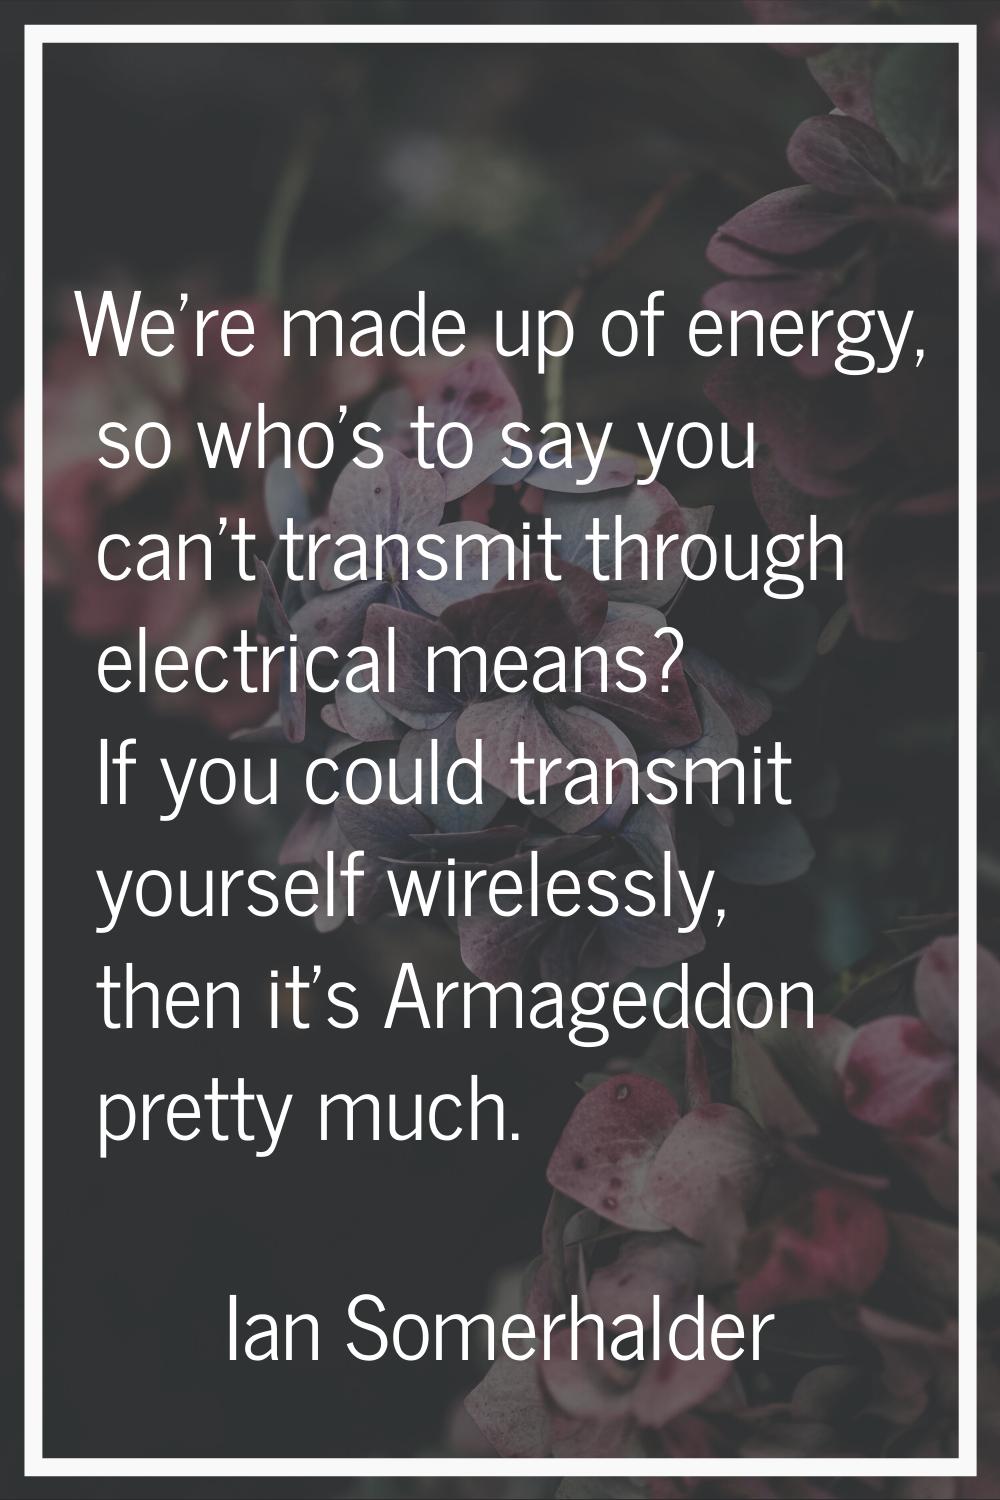 We're made up of energy, so who's to say you can't transmit through electrical means? If you could 